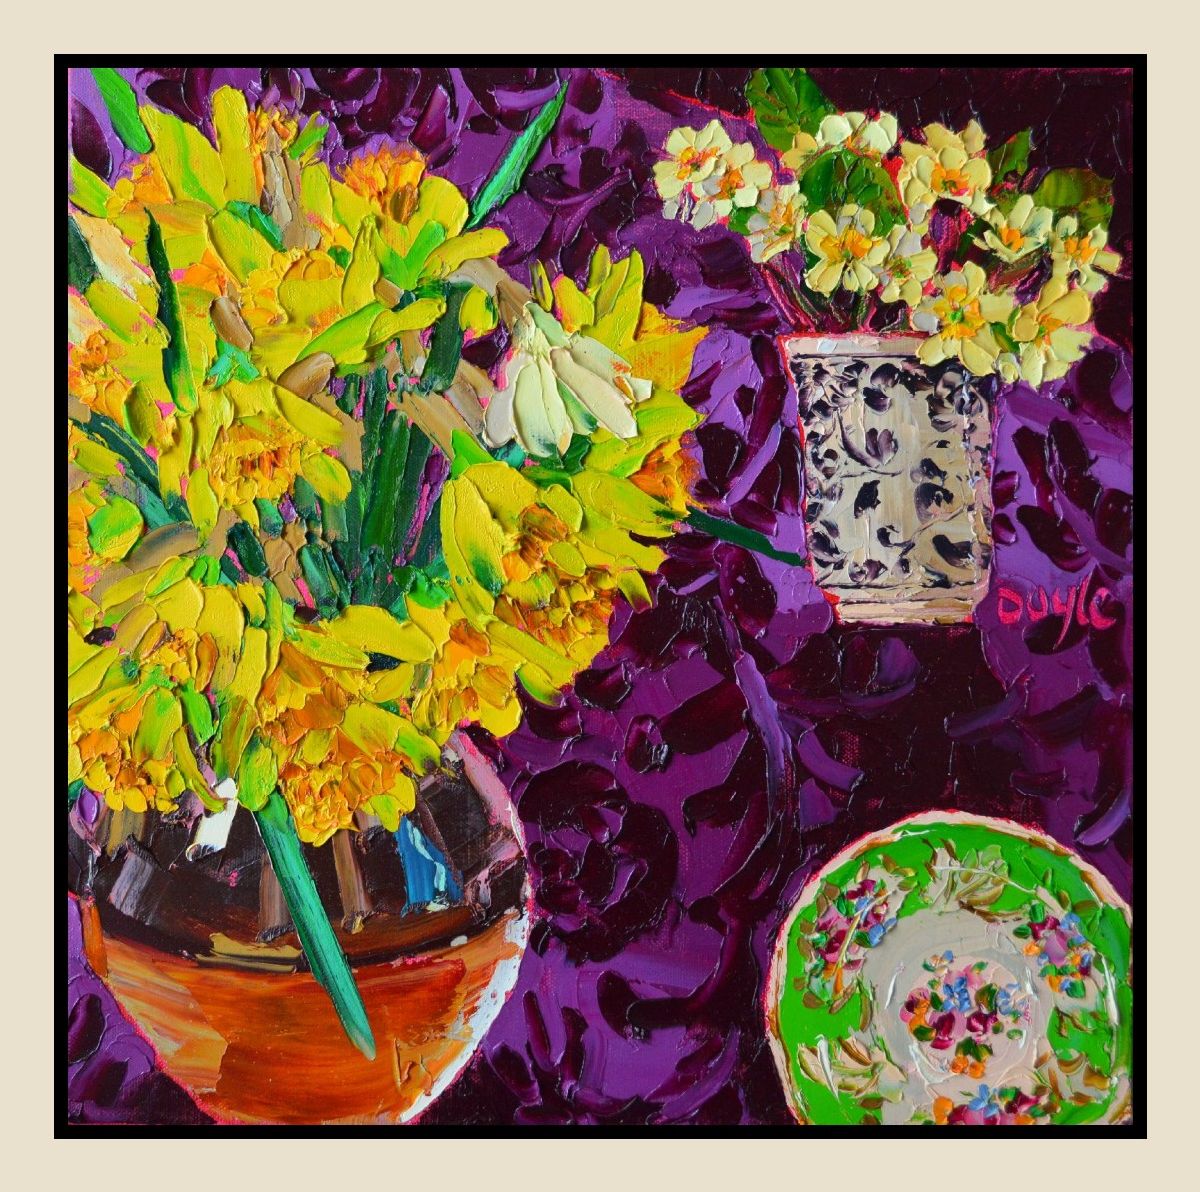 Primroses and Daffodils by Lucy Doyle